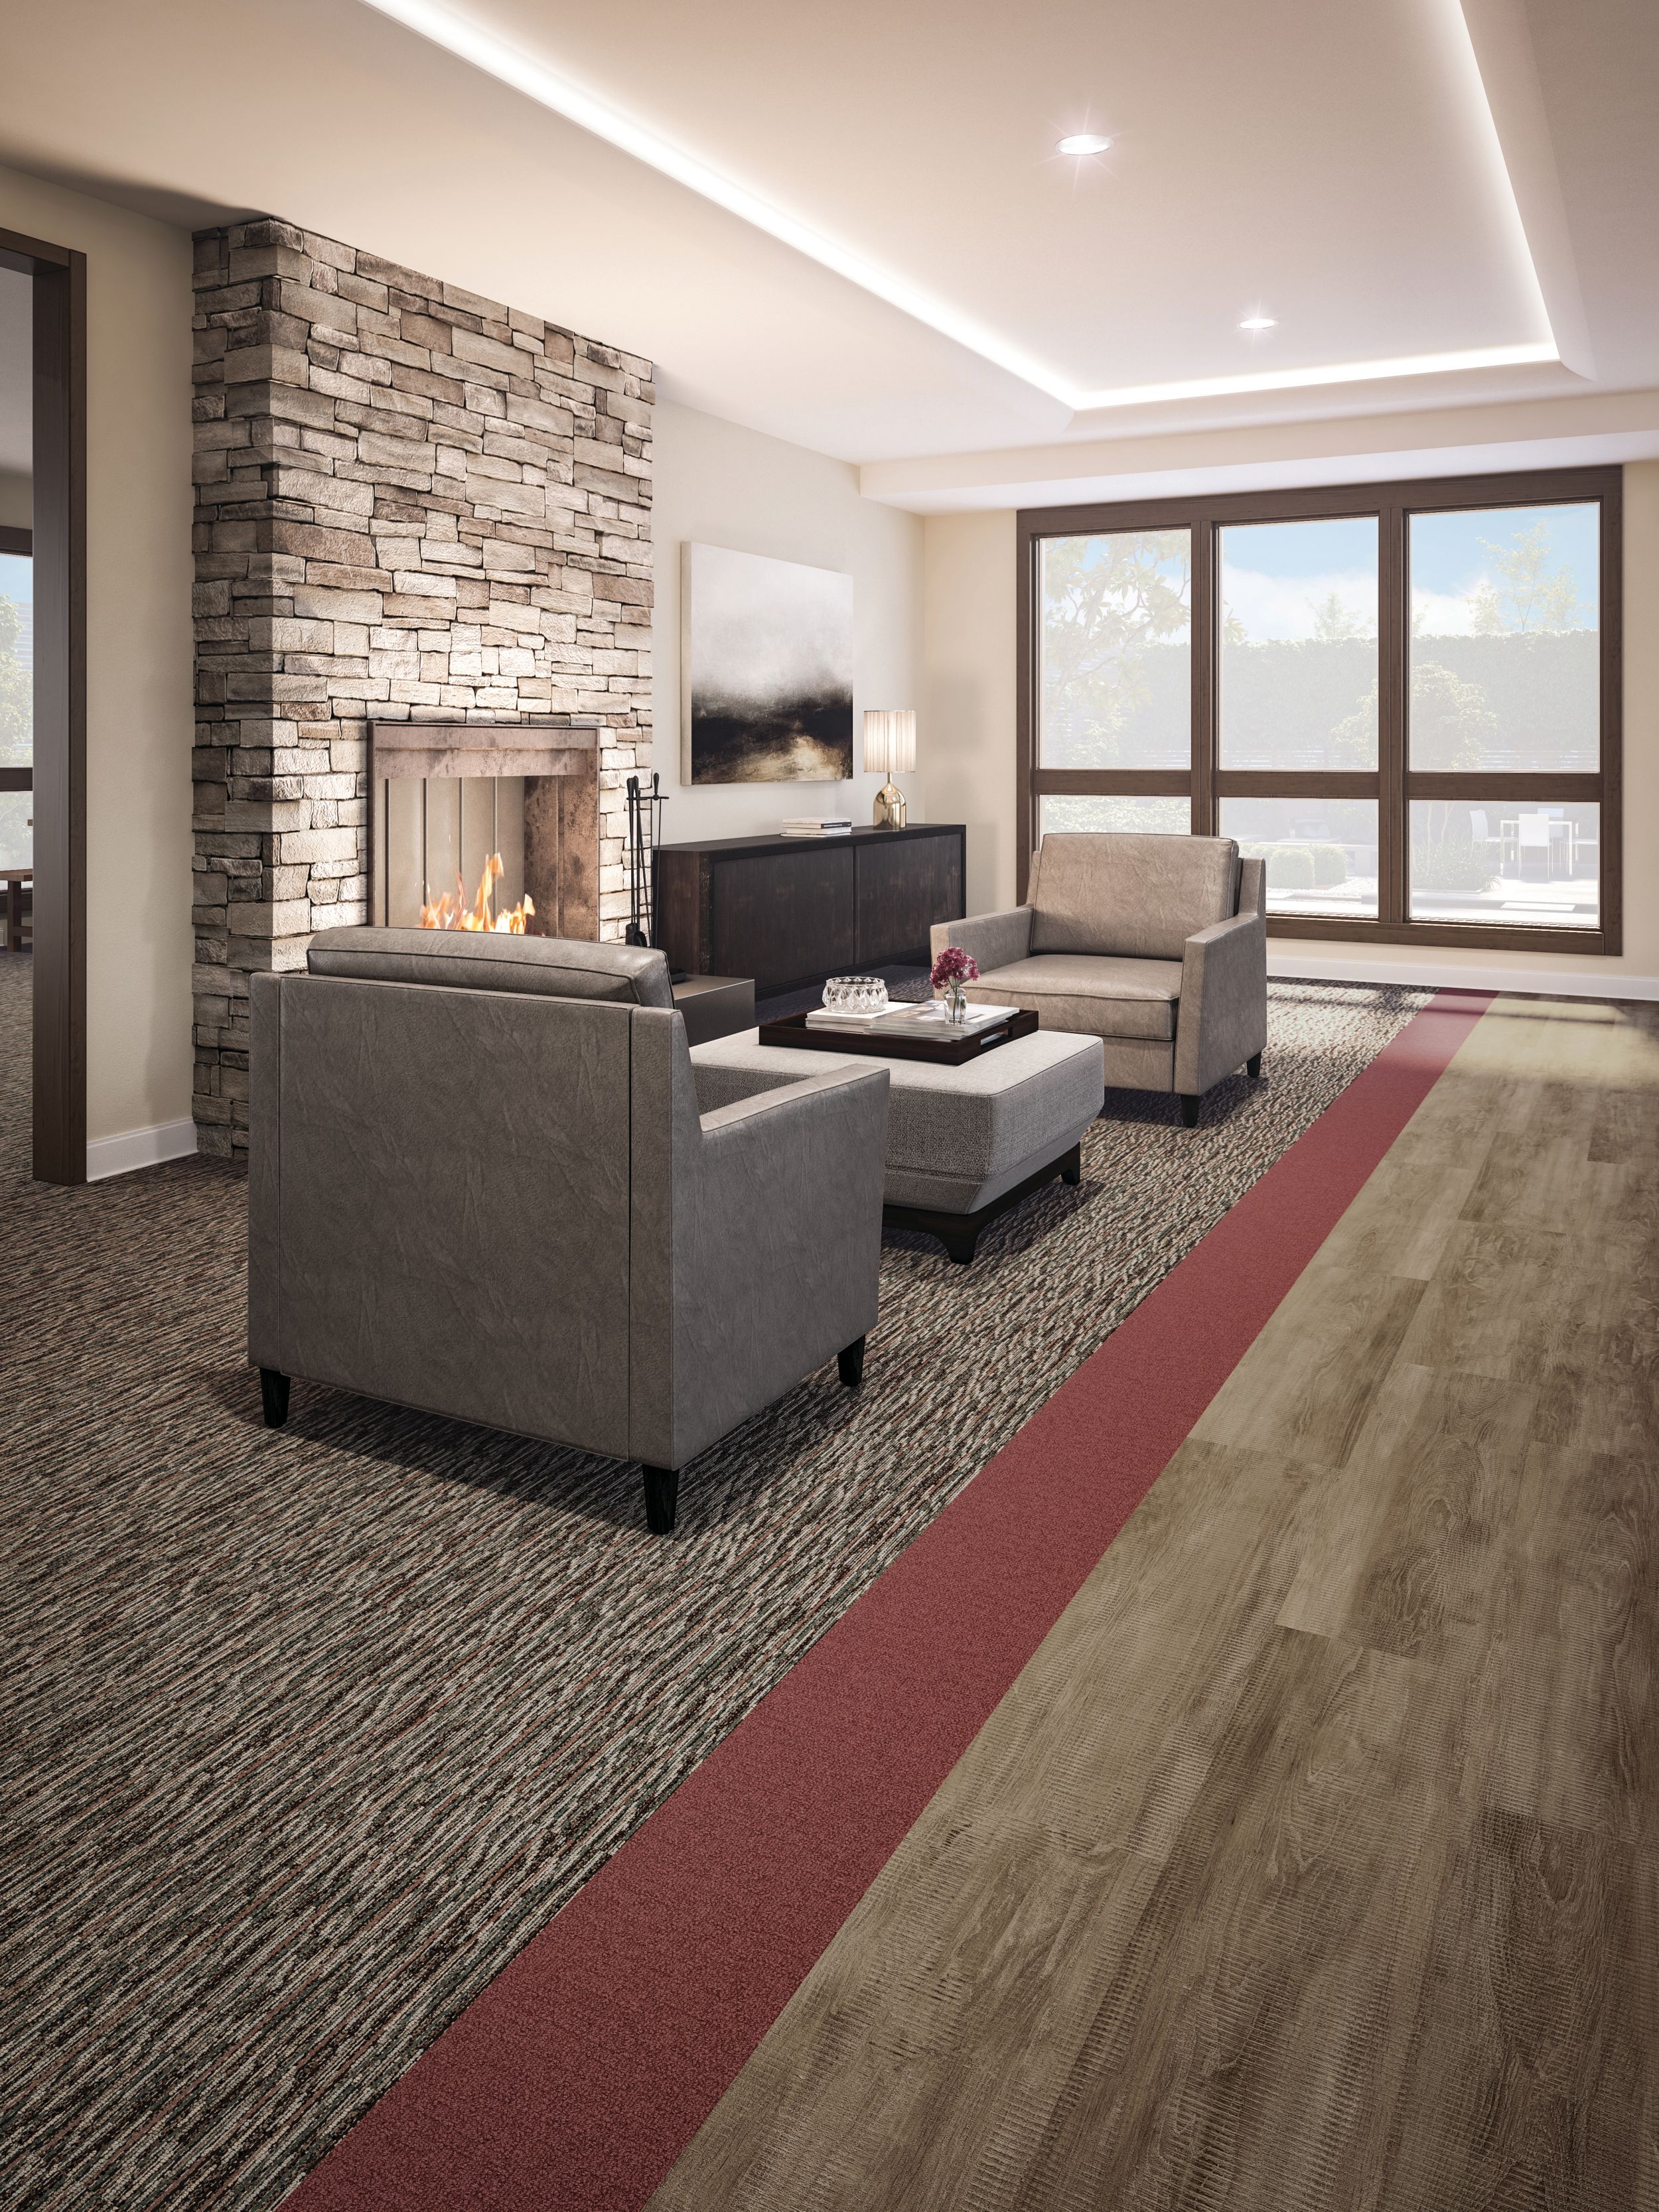 Interface Farmland and Monochrome carpet tile with Textured Woodograins LVT in senior housing seating area with stone fireplace image number 12